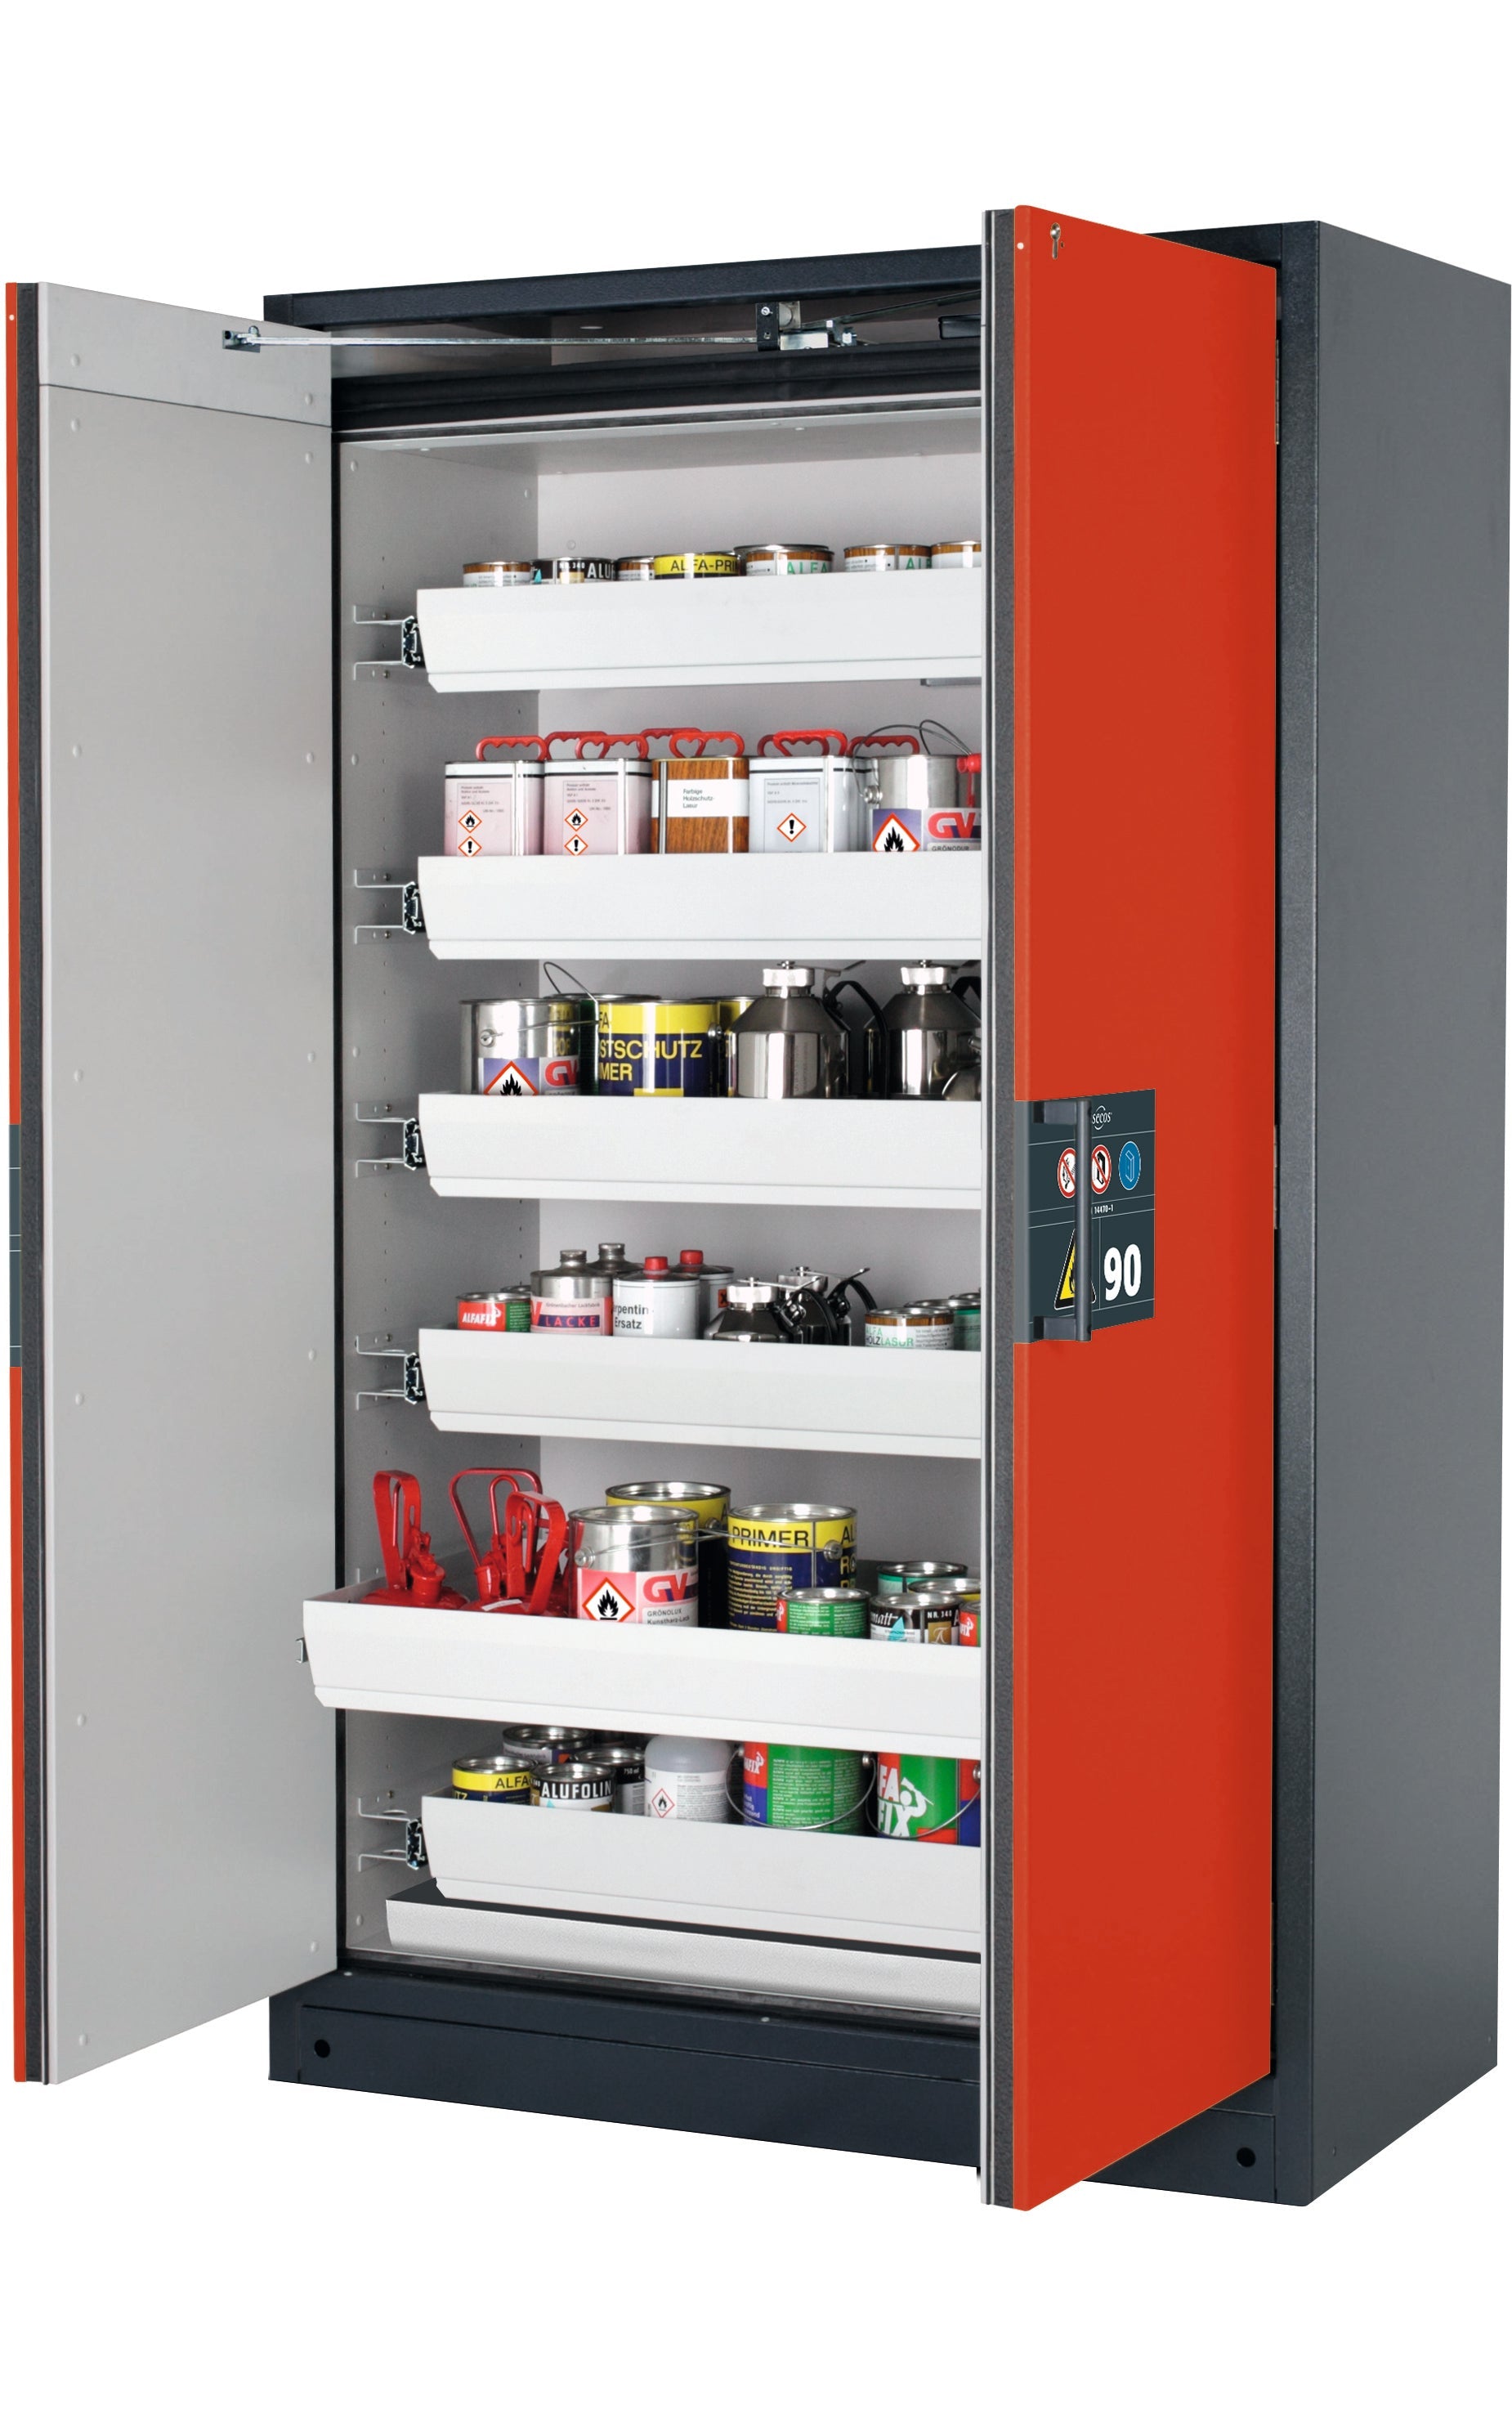 Type 90 safety storage cabinet Q-PEGASUS-90 model Q90.195.120.WDAC in traffic red RAL 3020 with 6x drawer (standard) (sheet steel),